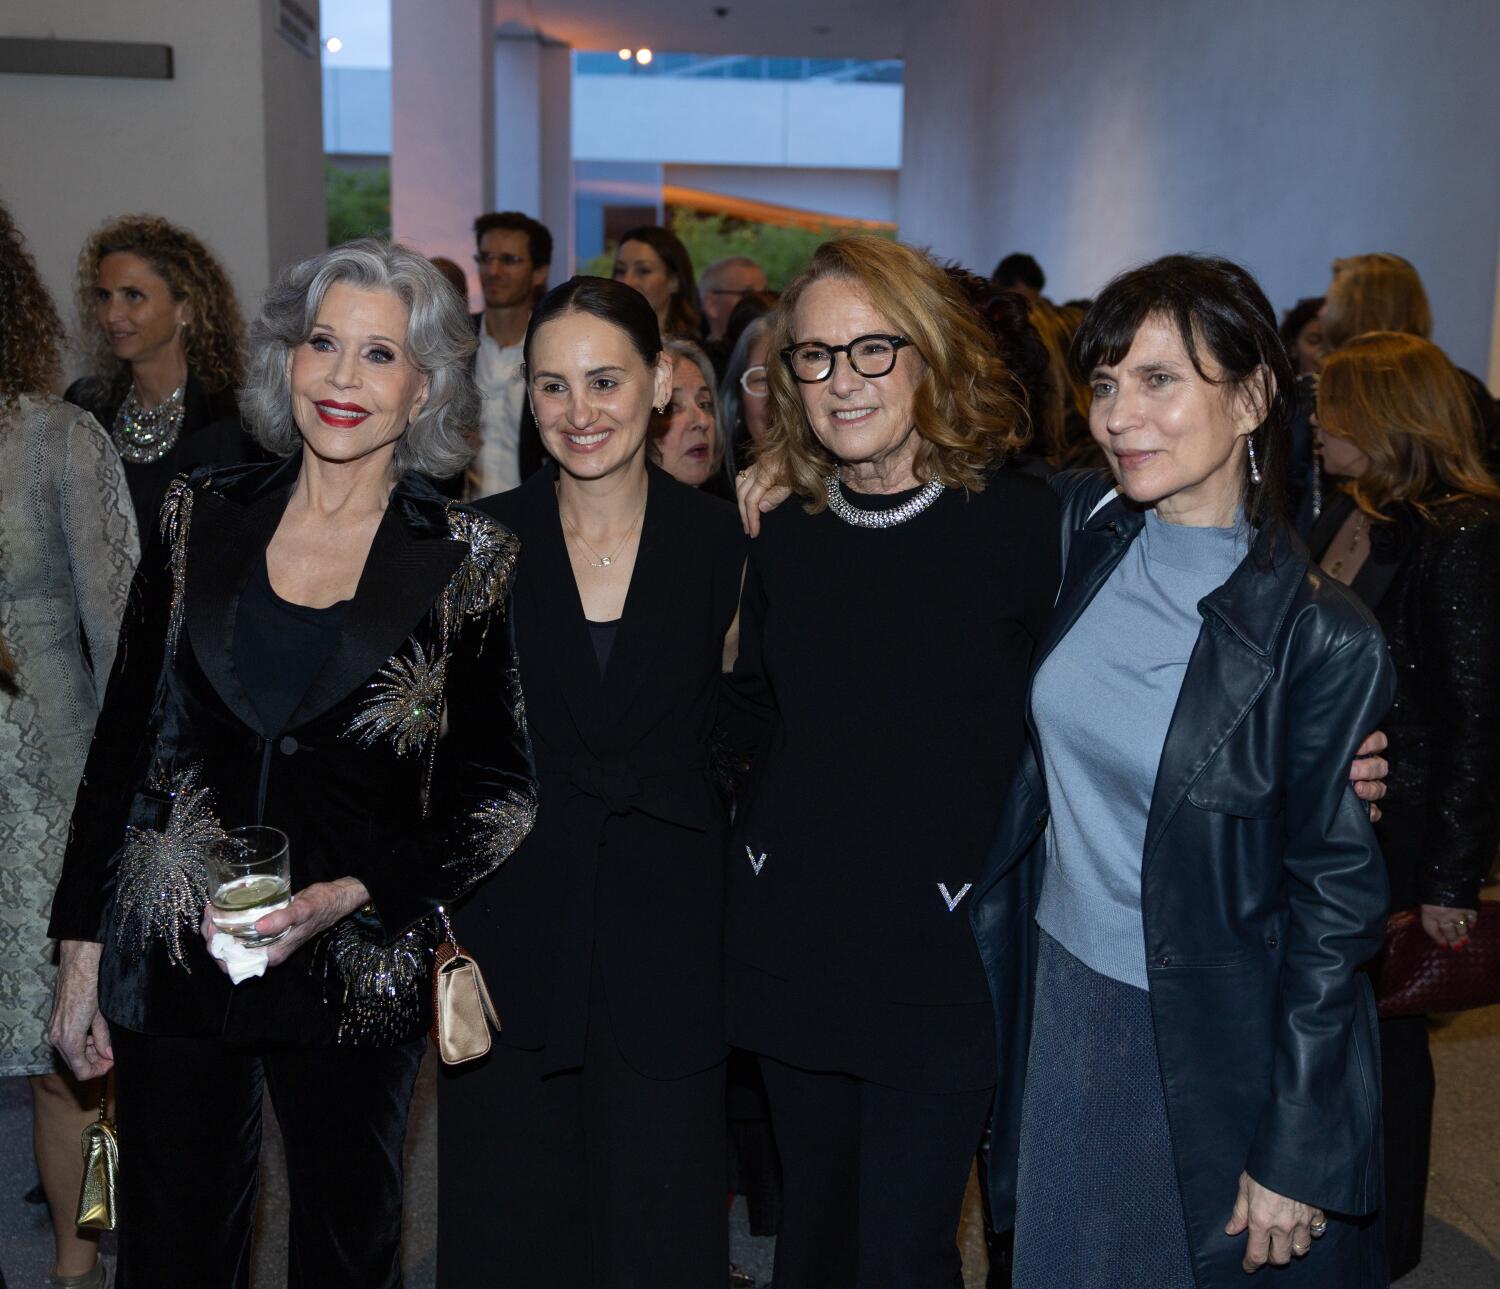 hammer-museum-pays-tribute-to-departing-director-ann-philbin-at-star-packed-gala